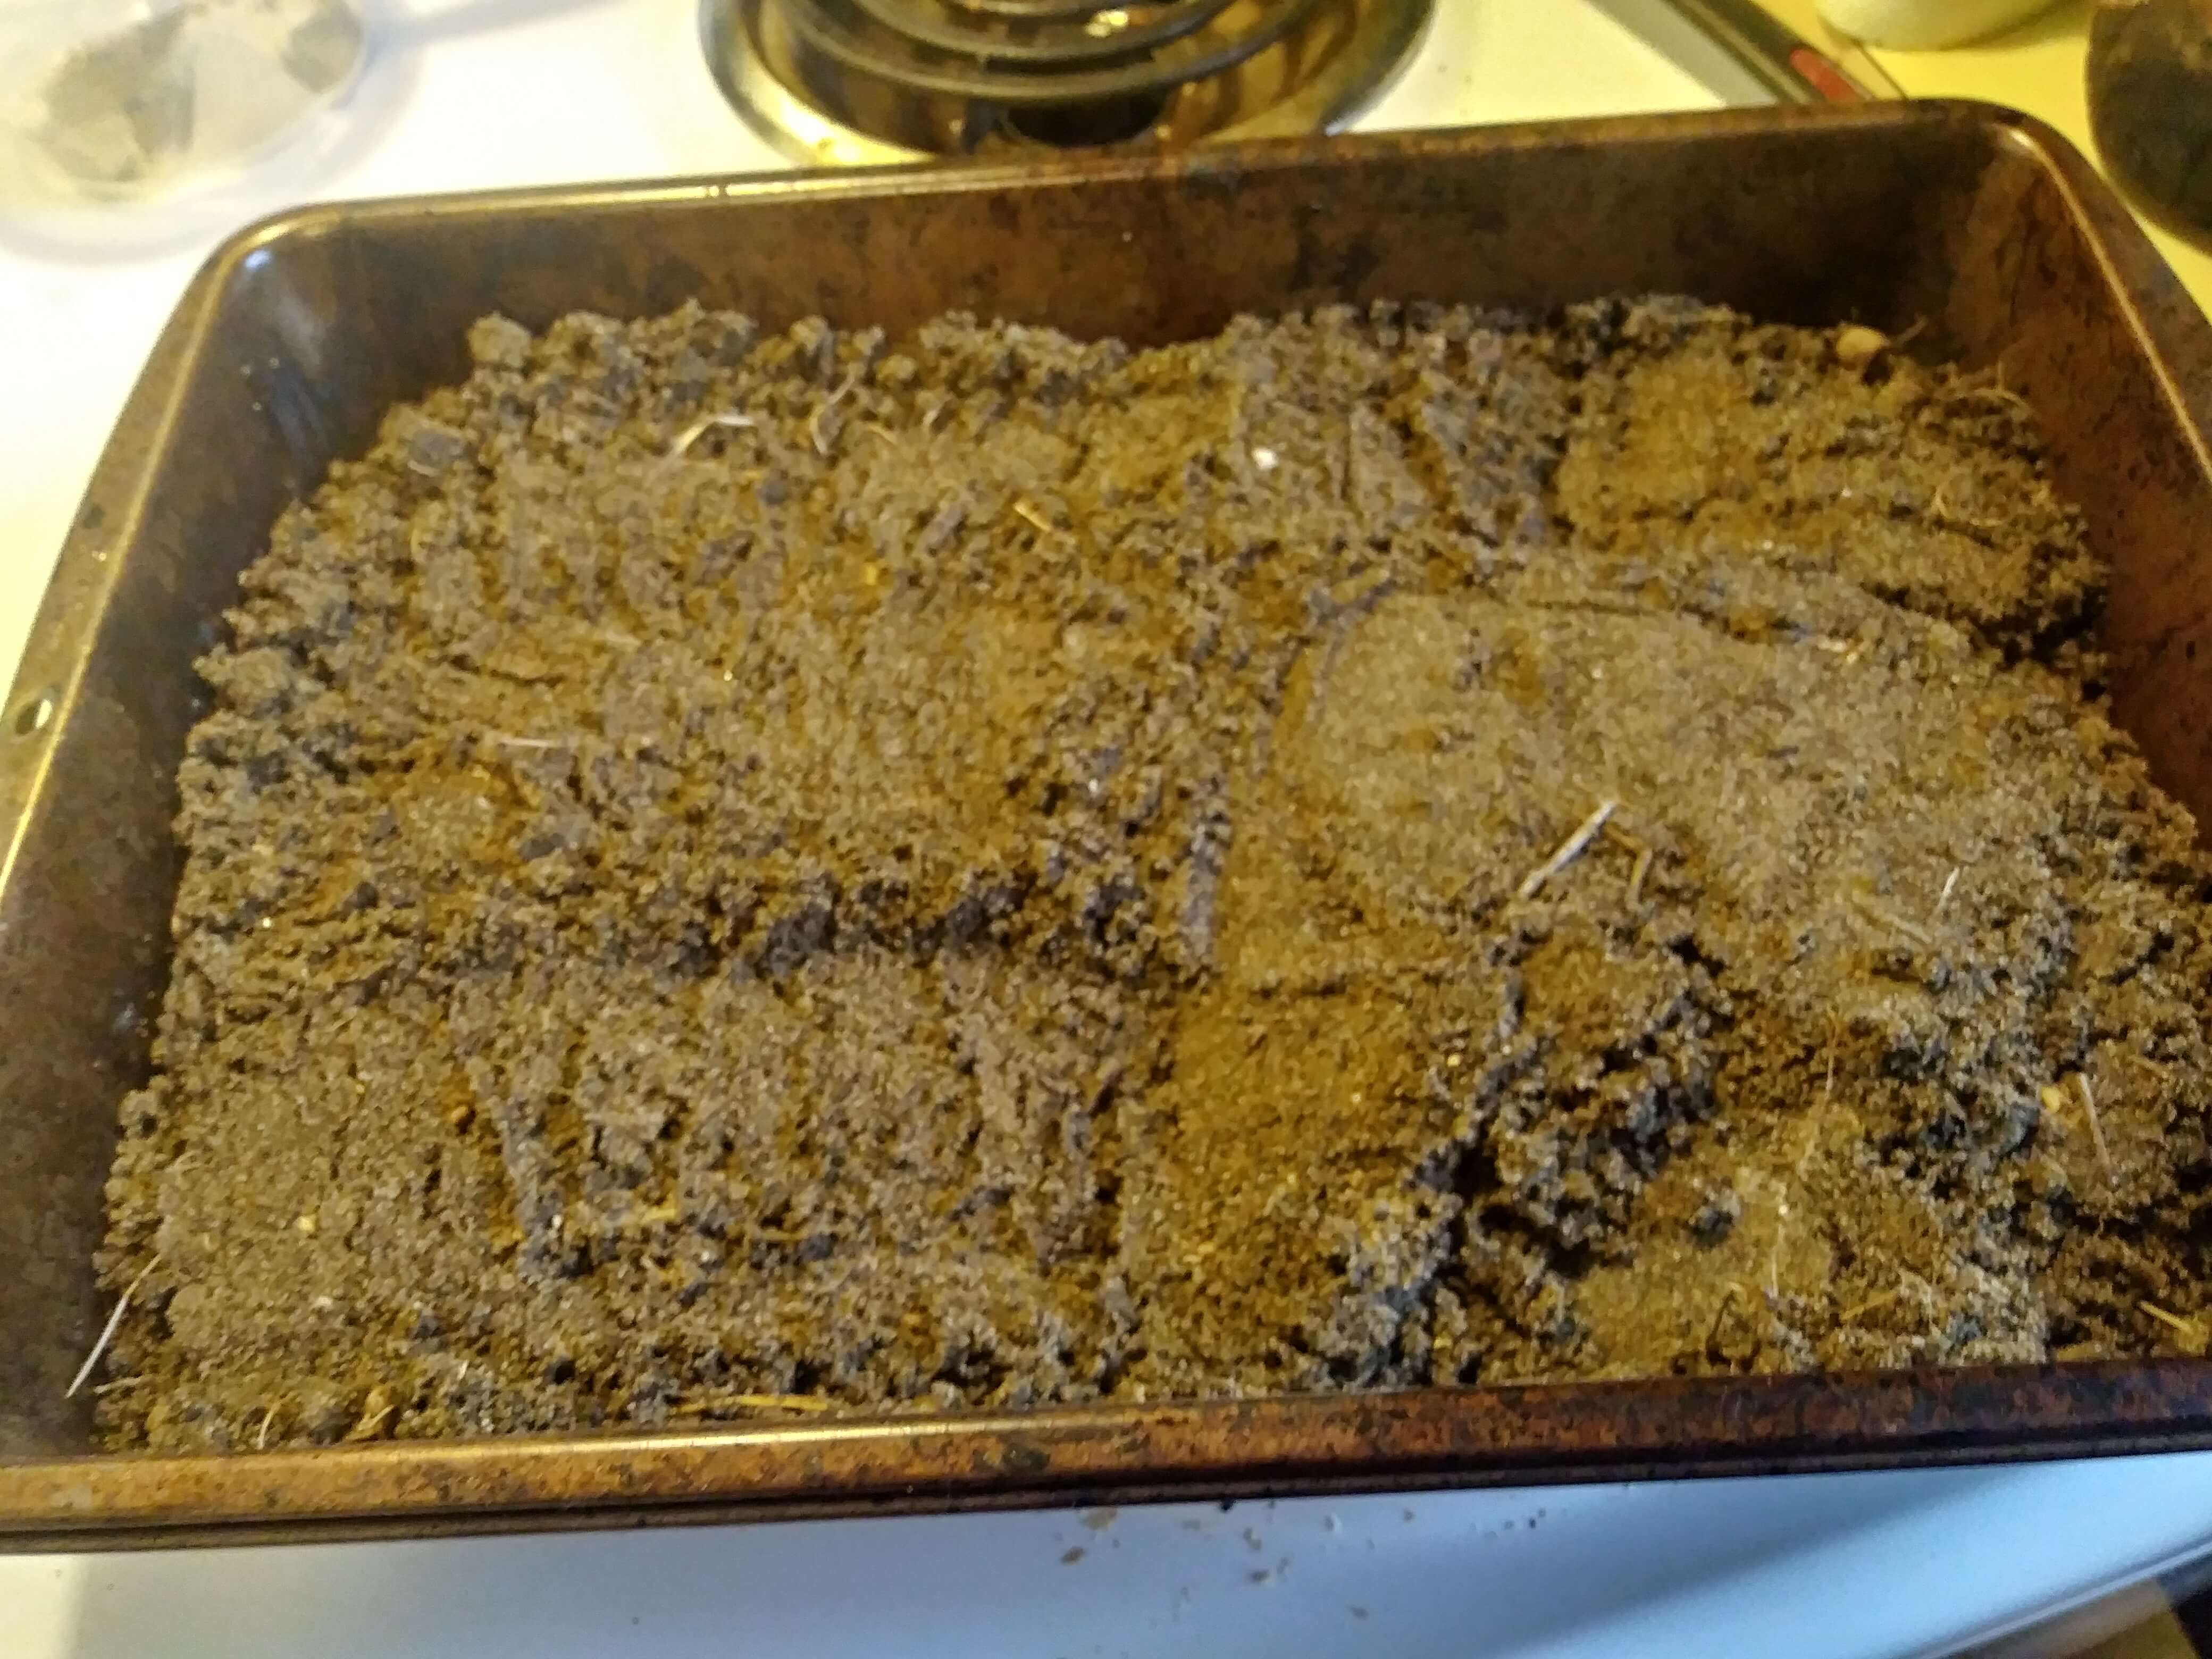 Dirt in an oven pan